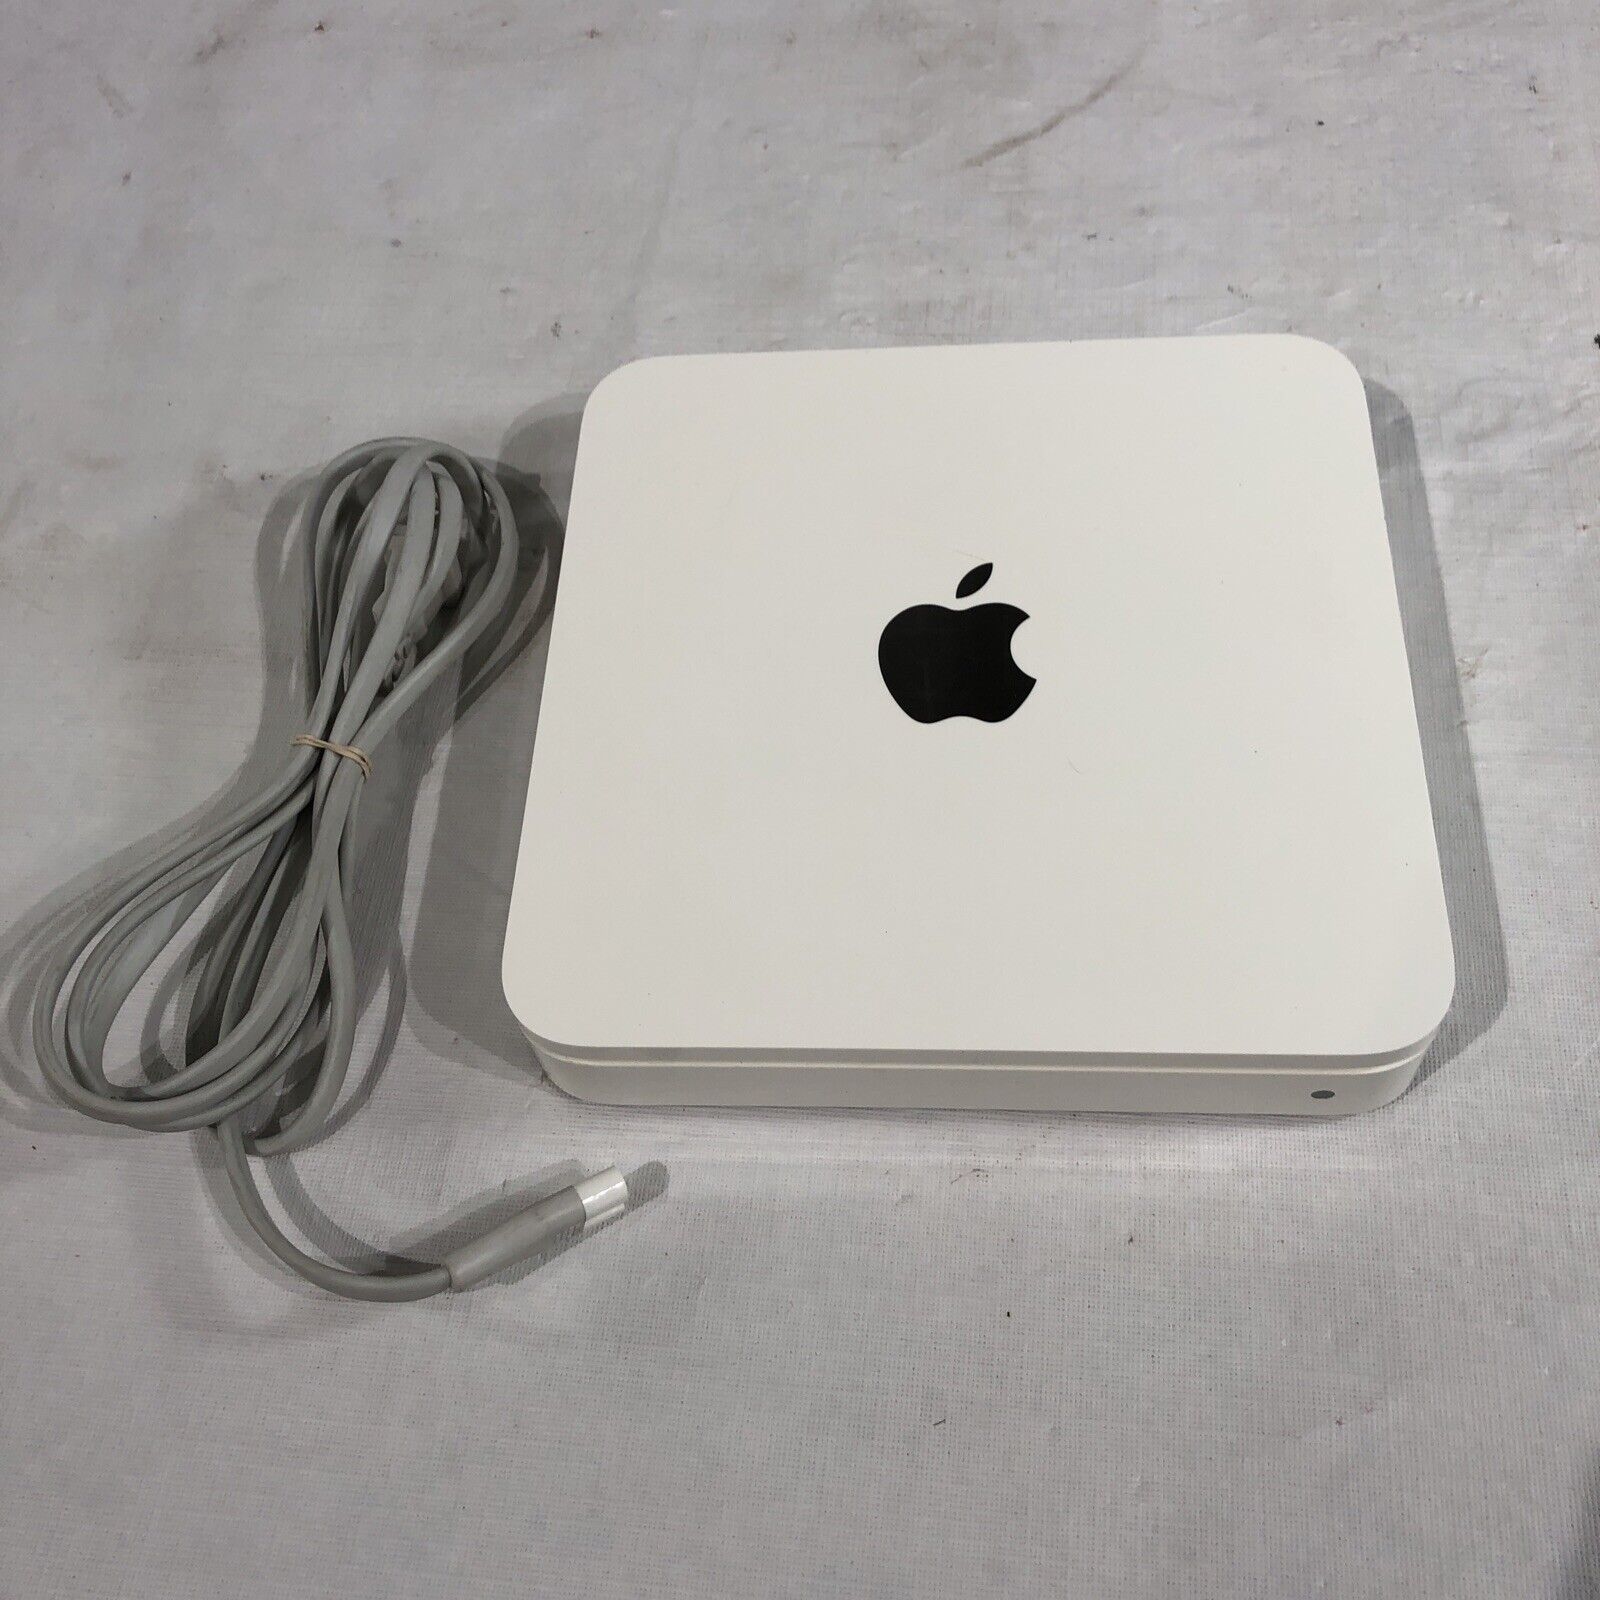 Apple AirPort Time Capsule Dual Band Wireless Router HDD A1254 500GB